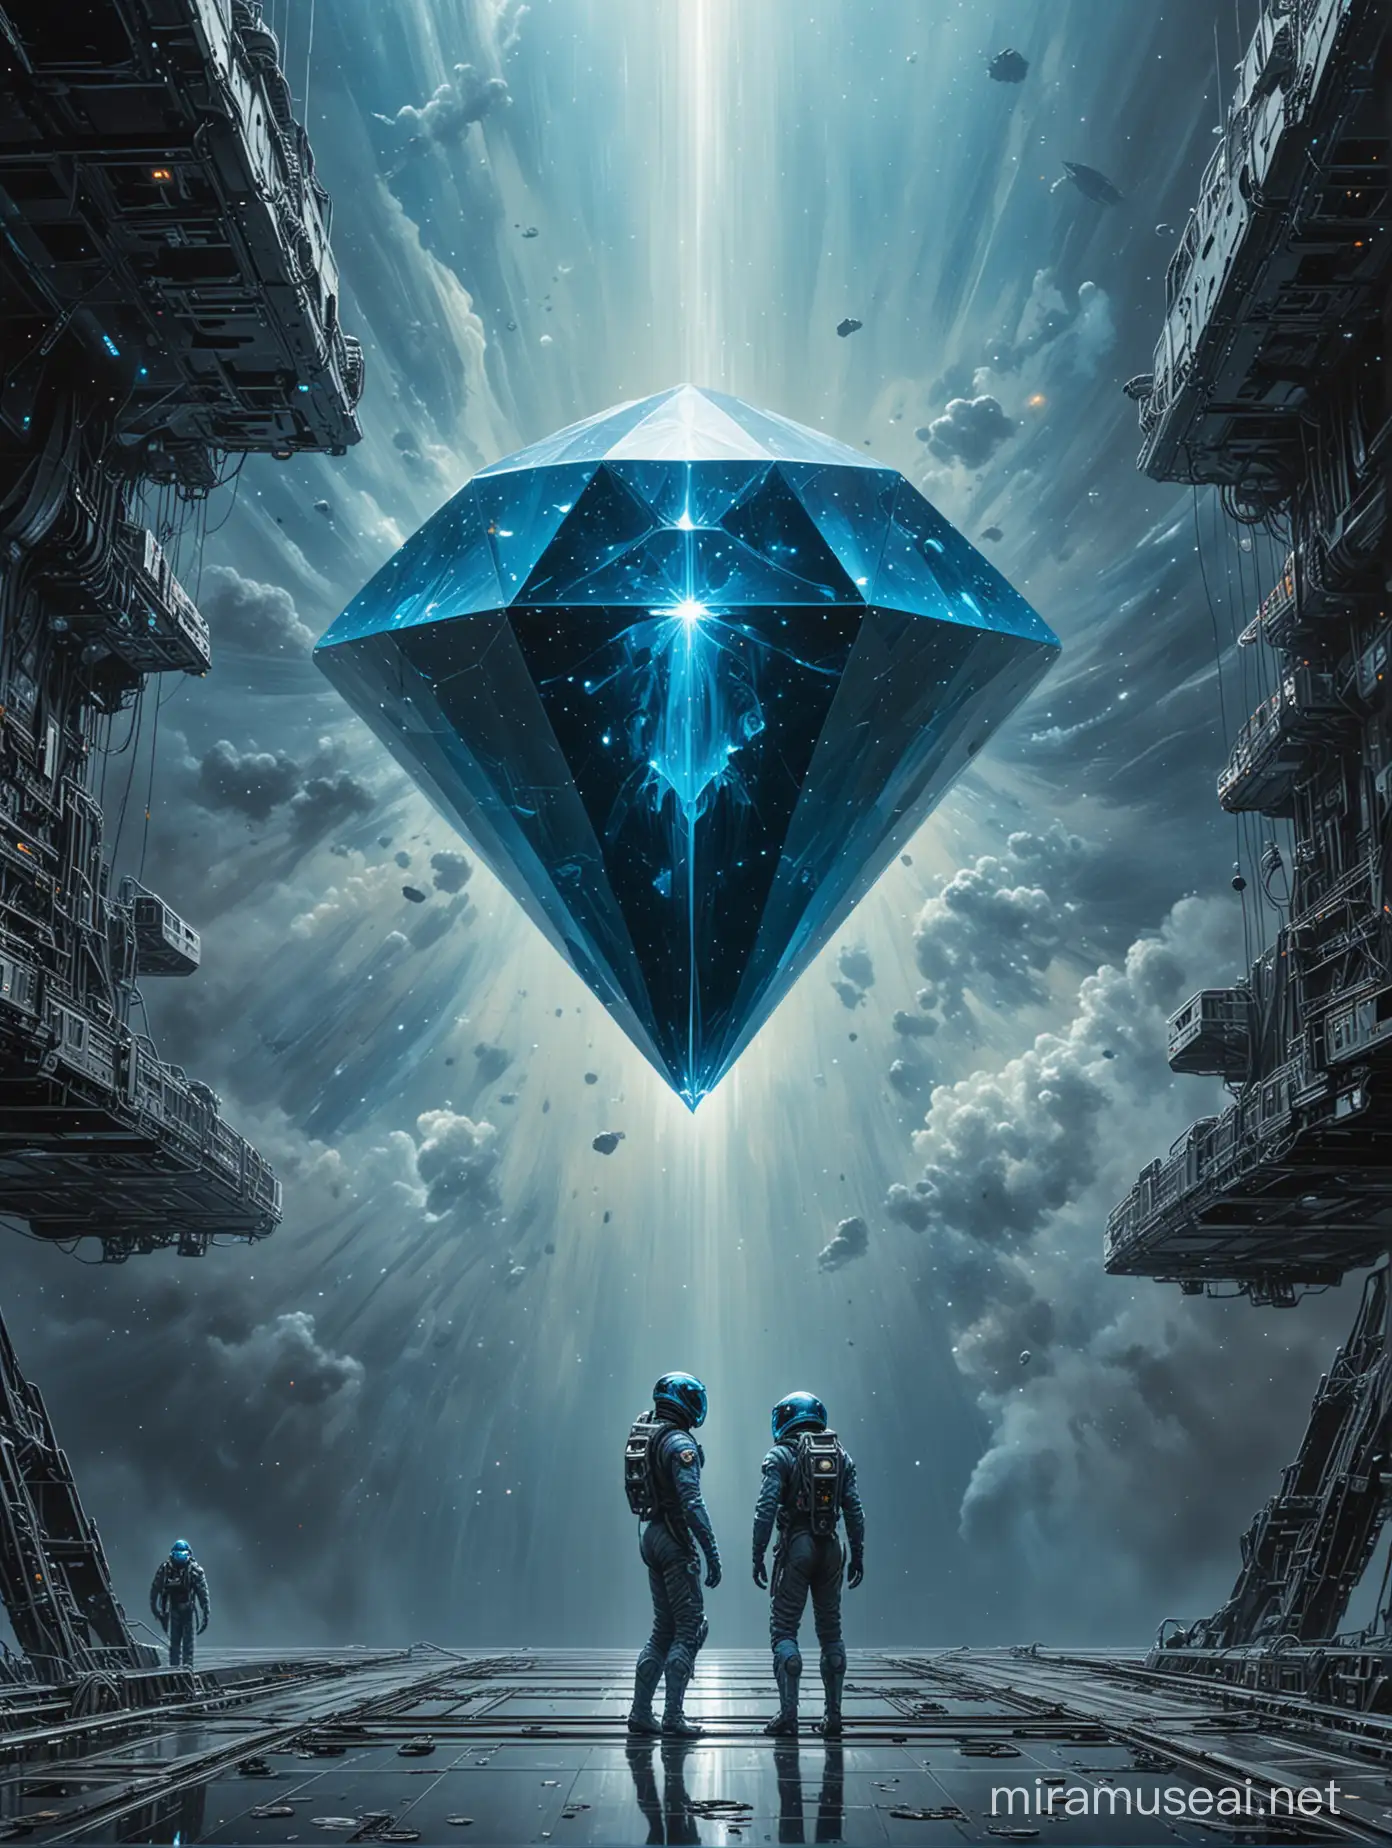 Highly detailed painting, a giant pure blue diamond hovers suspended in midair over the steel deck of a futuristic space cruiser, spacesuited figures stand on the deck looking at it in awe, sky is empty black space, use muted colors only, high quality
